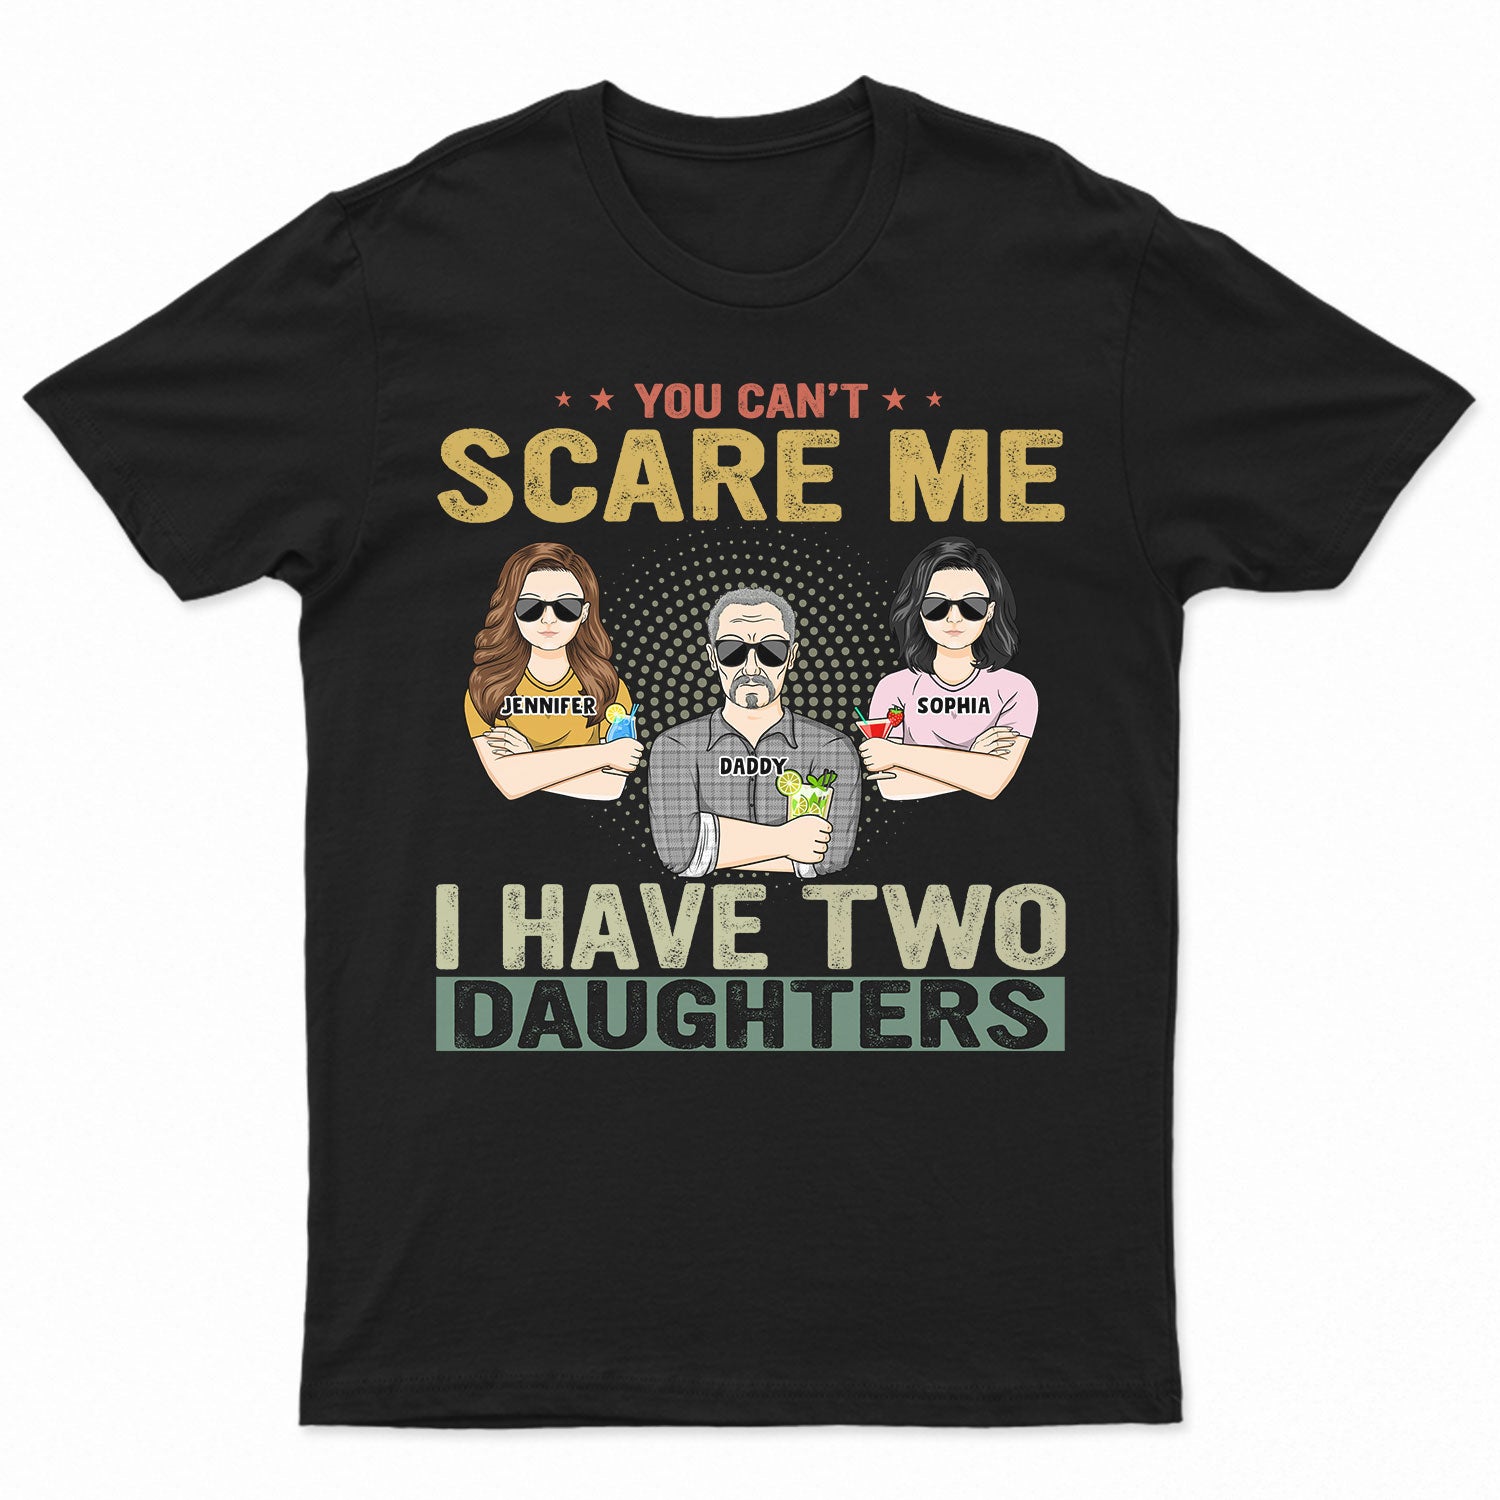 You Can't Scare Me - Birthday, Family Gift For Dad, Father, Grandpa, Daughters - Personalized Custom T Shirt